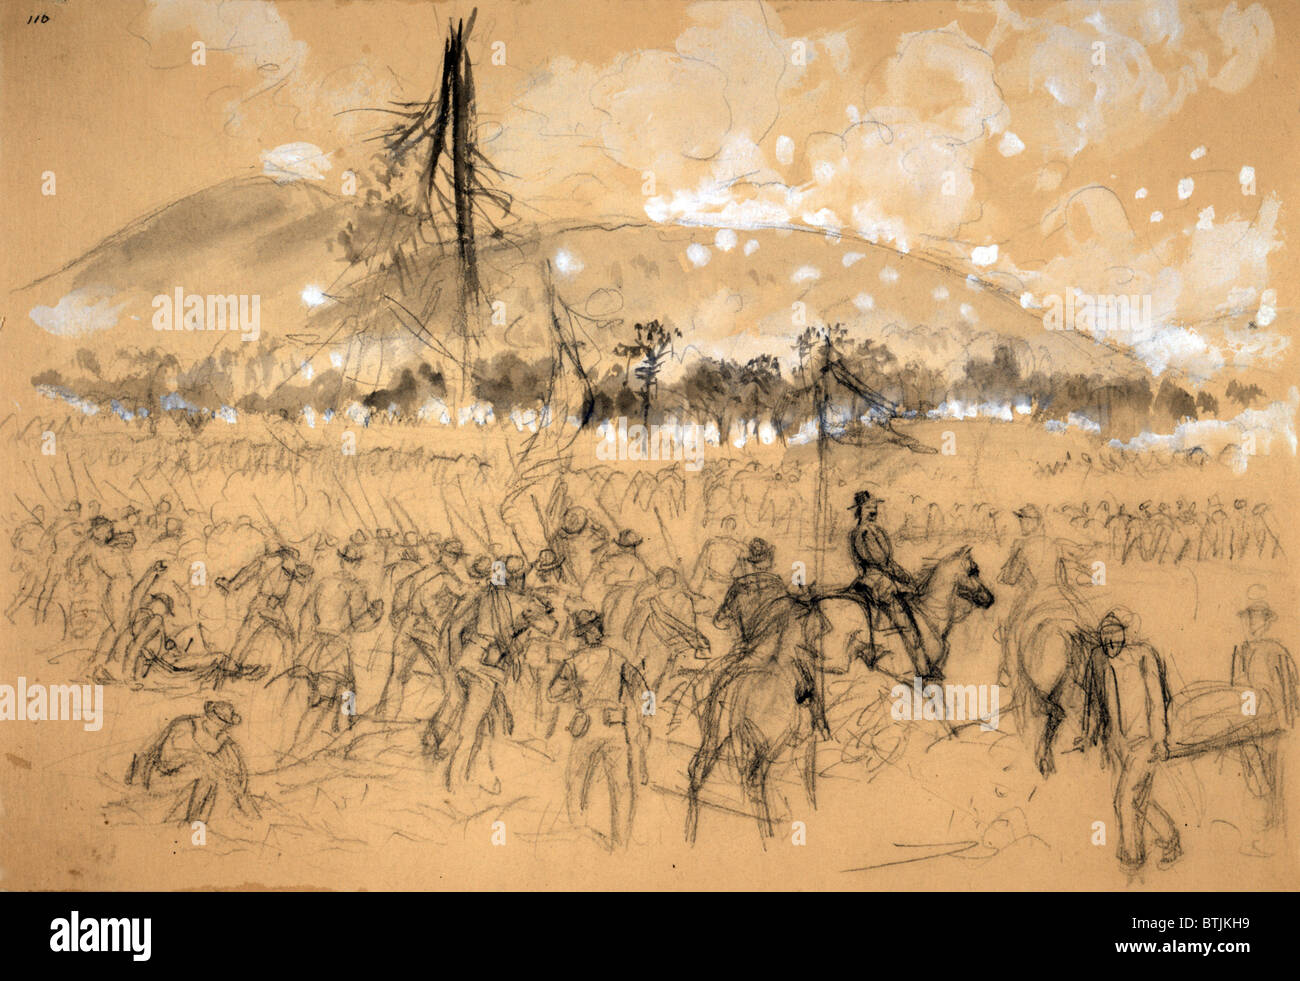 The Civil War, General William Tecumseh Sherman, at the Battle of Kennesaw Mountain, Georgia. Sketch of Union troops charging towards Kennesaw, drawing on yellow paper, by Alfred R. Waud, June 27, 1864. Stock Photo